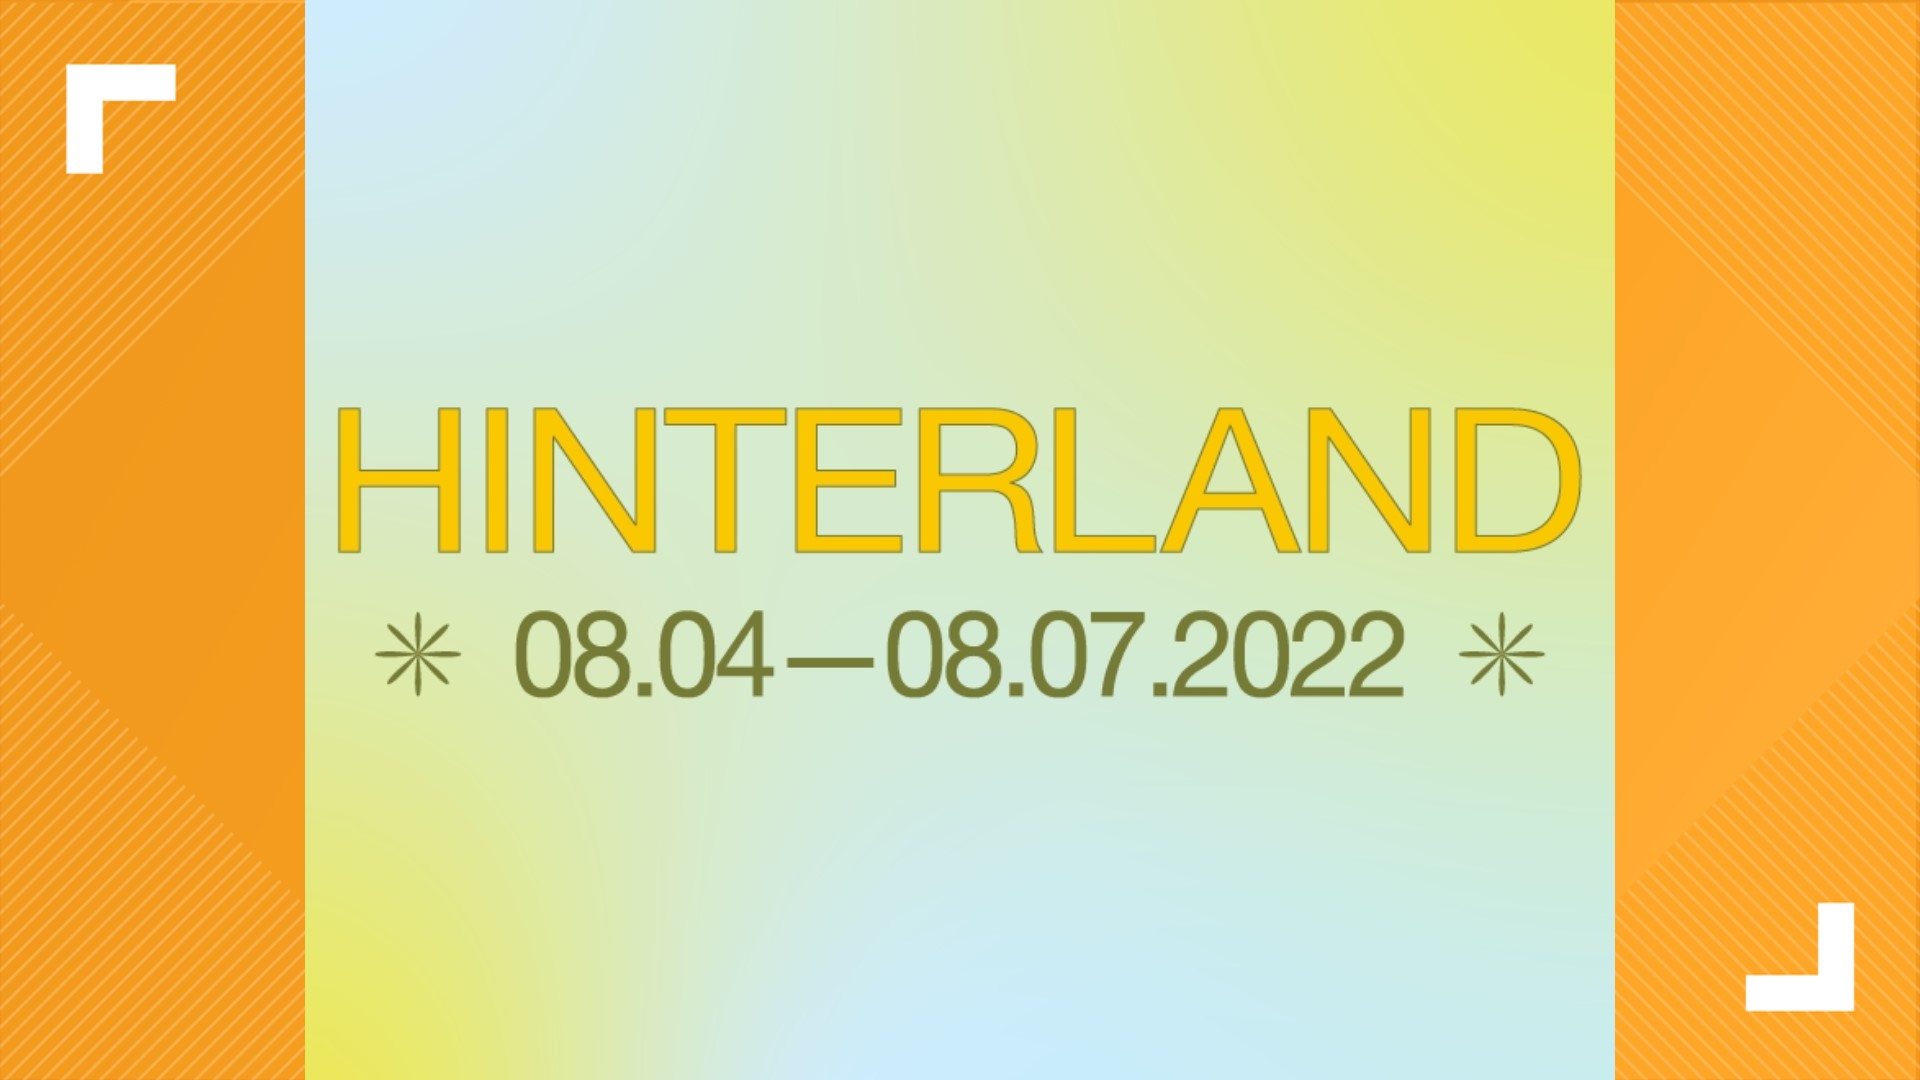 Festival passes for Hinterland 2022 go on sale Friday at 10 a.m.